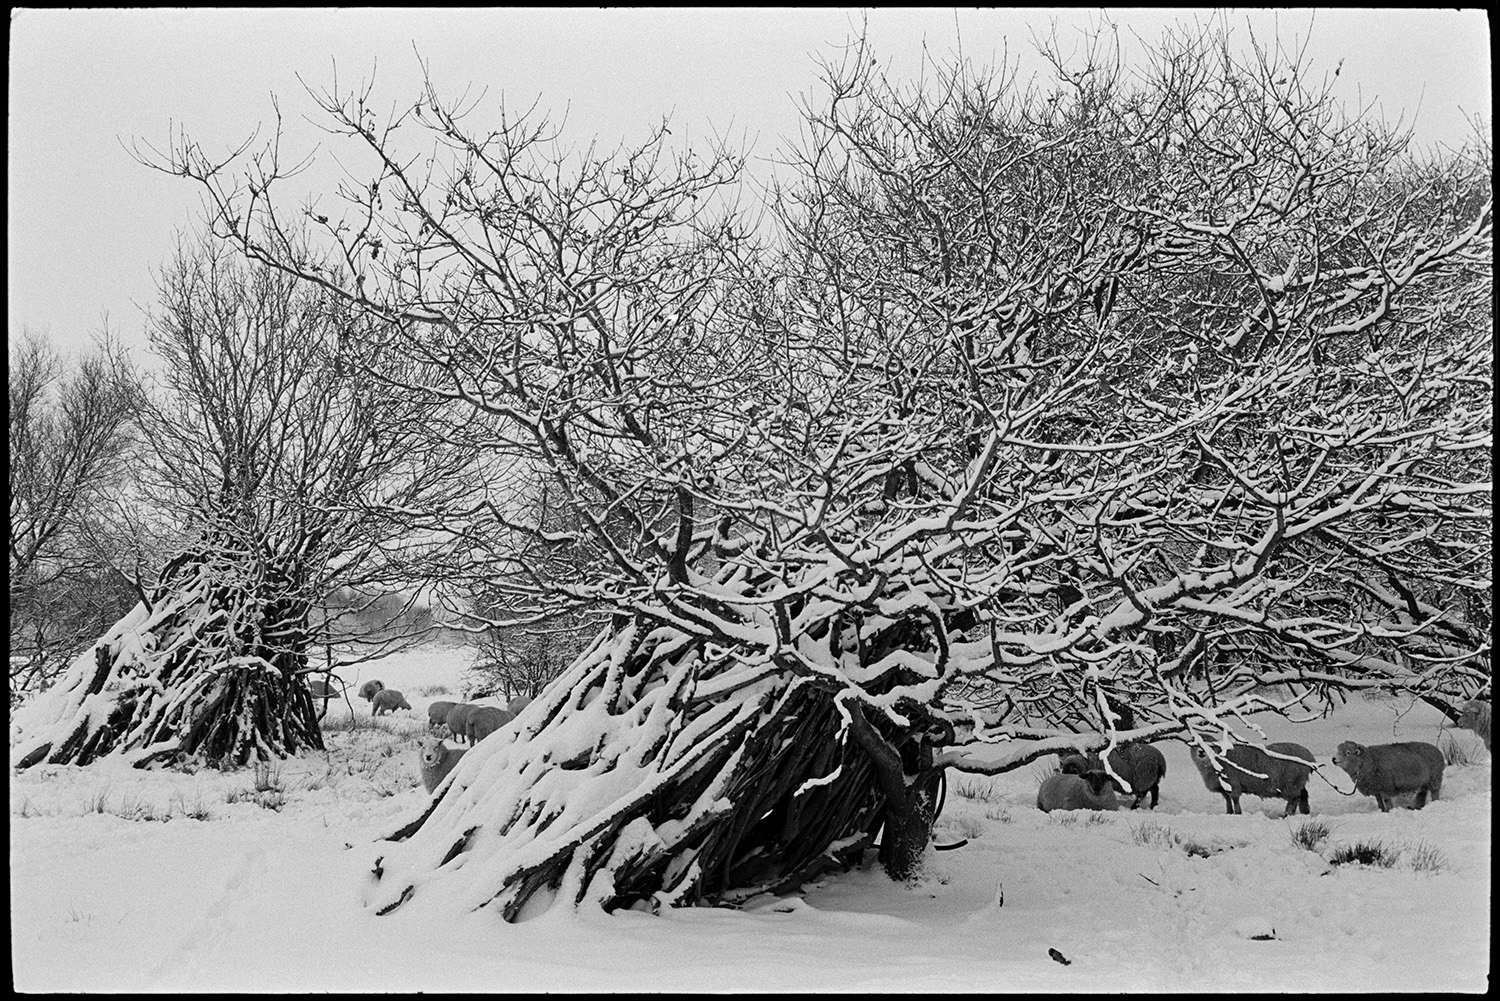 Snow, sheep in snowdrifts with woodpiles amongst trees, also poultry.
[Snow covered woodpiles resting against trees at Cuppers Piece, Beaford. Sheep are grazing in the snow covered field in the background.]